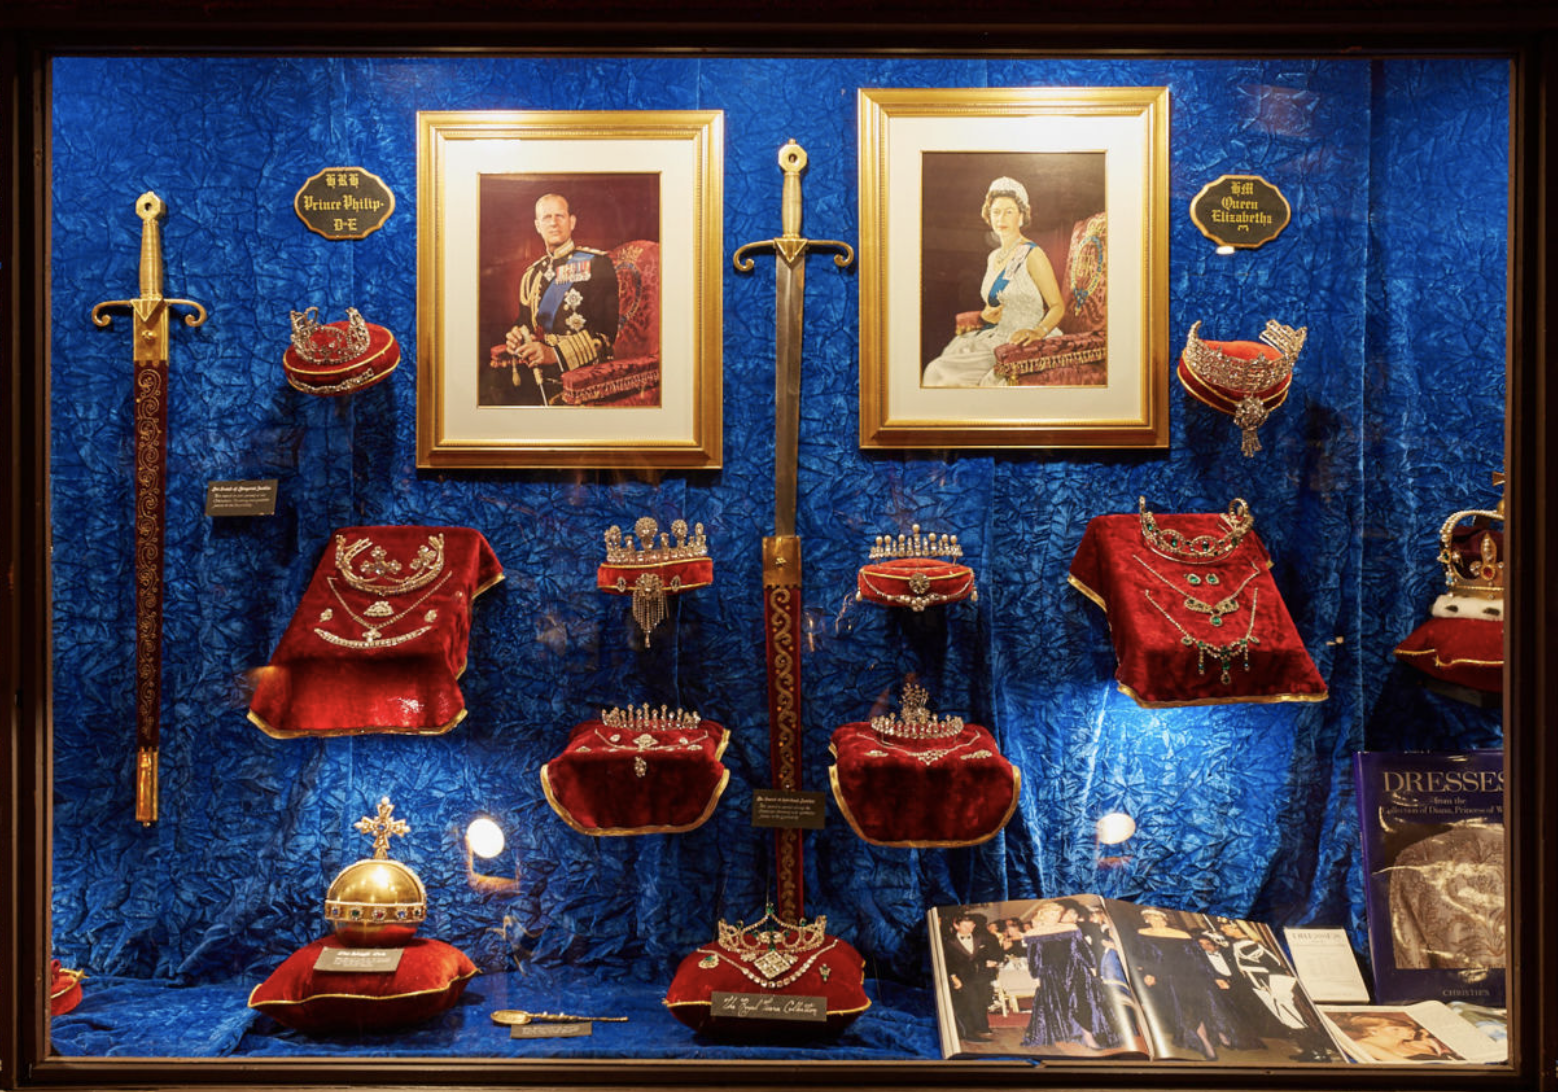 replicas of the Royal Family's crowns and swords